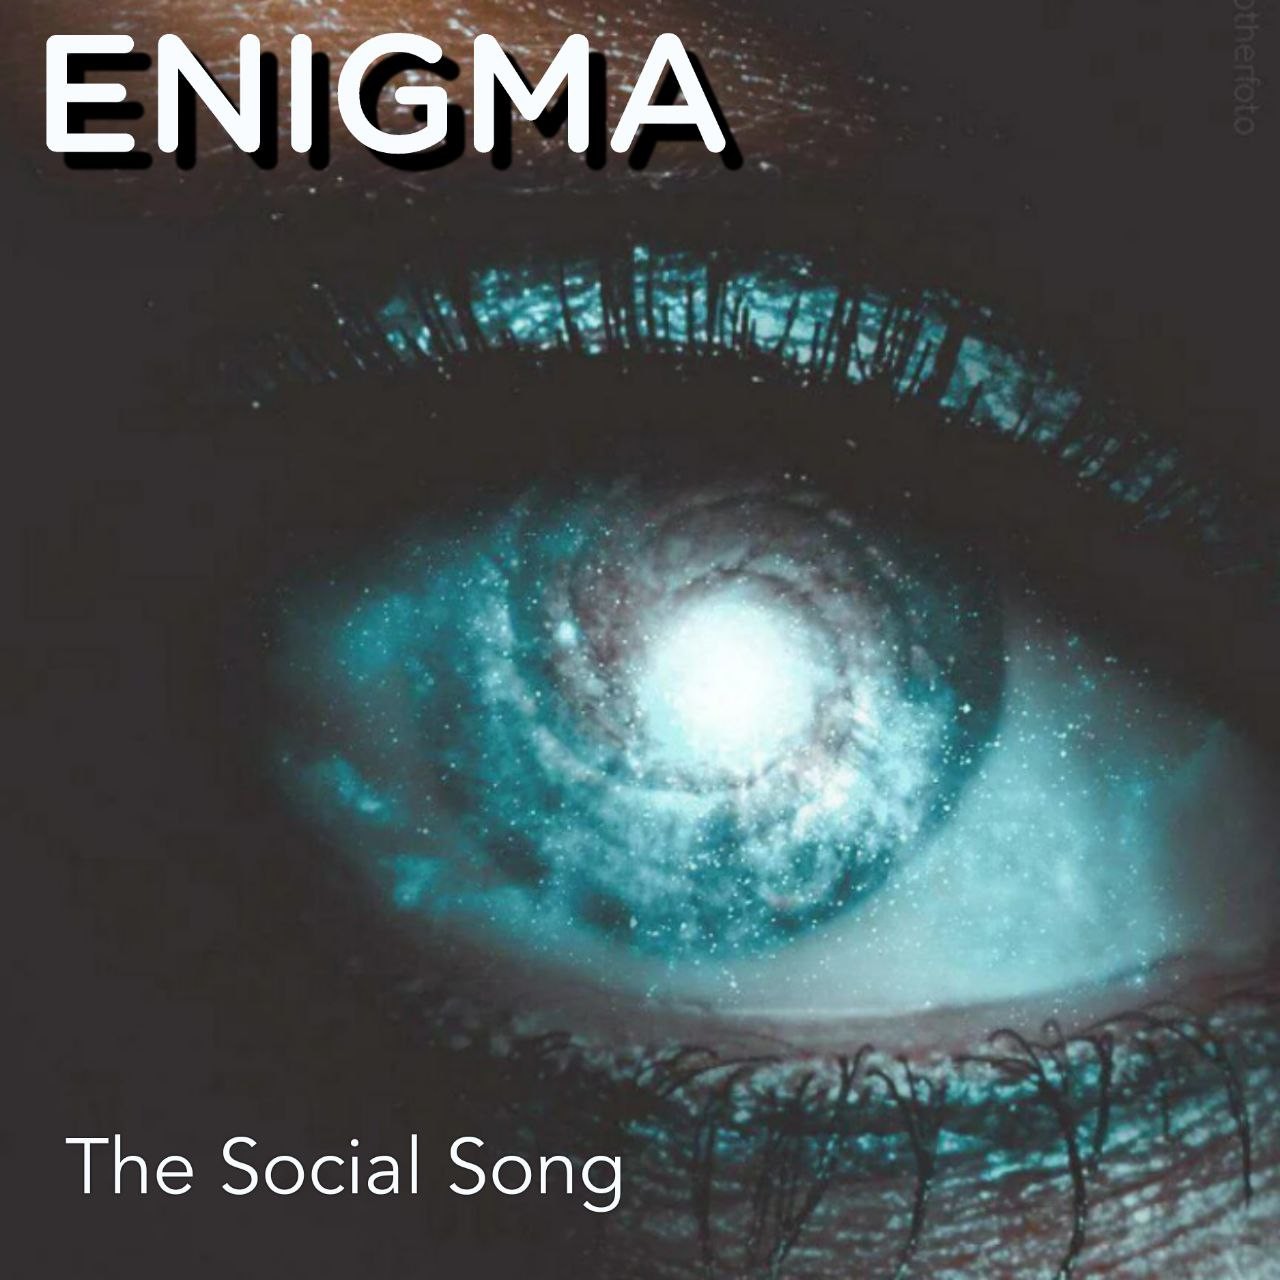 Enigma - MMX The Social Song (NG Remix)